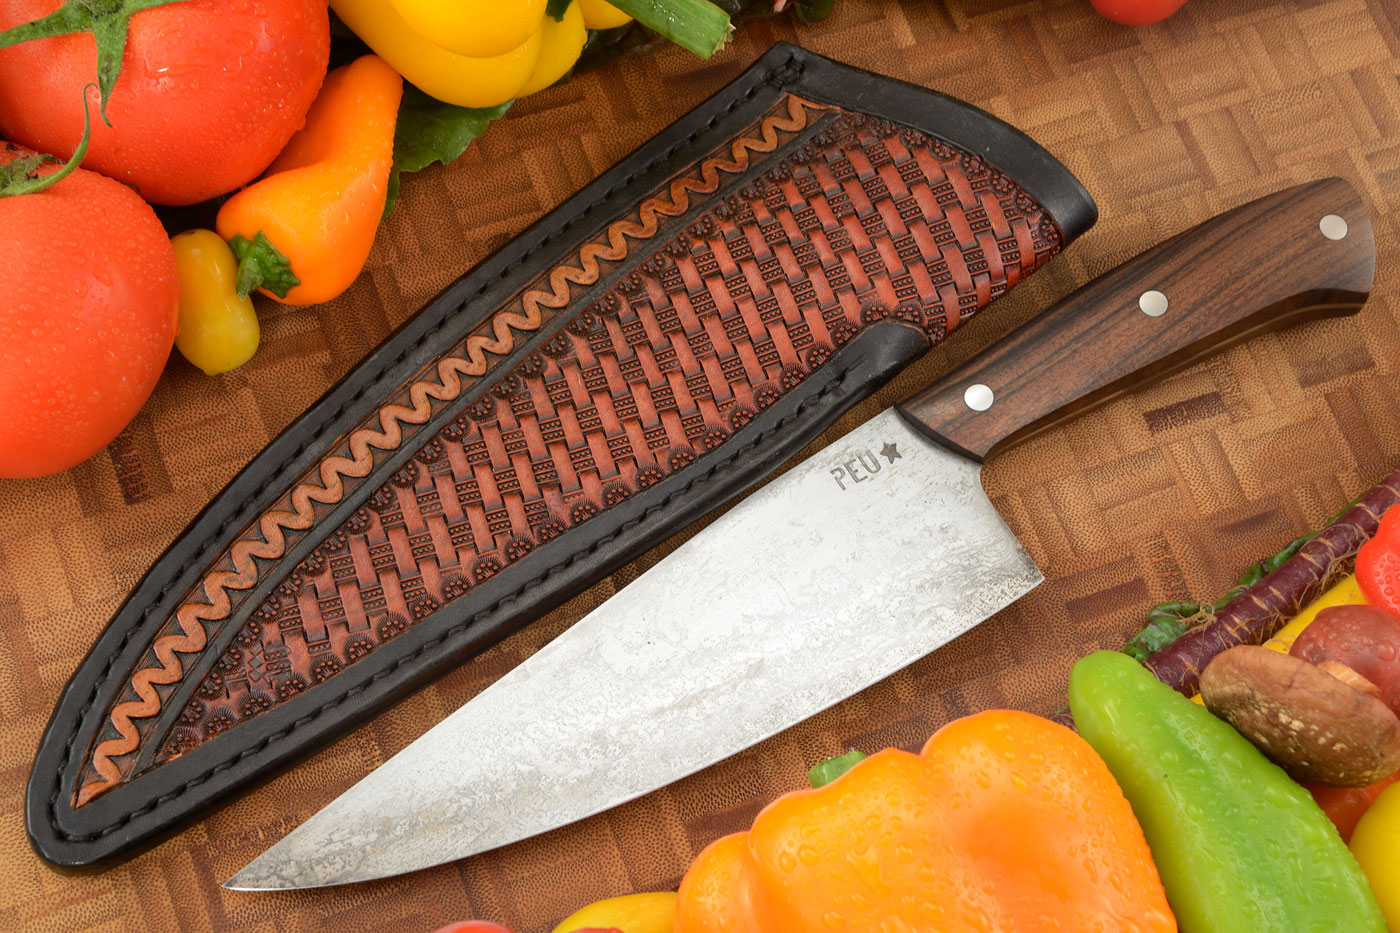 Chef's Knife (Cocinero 180mm) with Pau Ferro Wood and O2 Carbon Steel